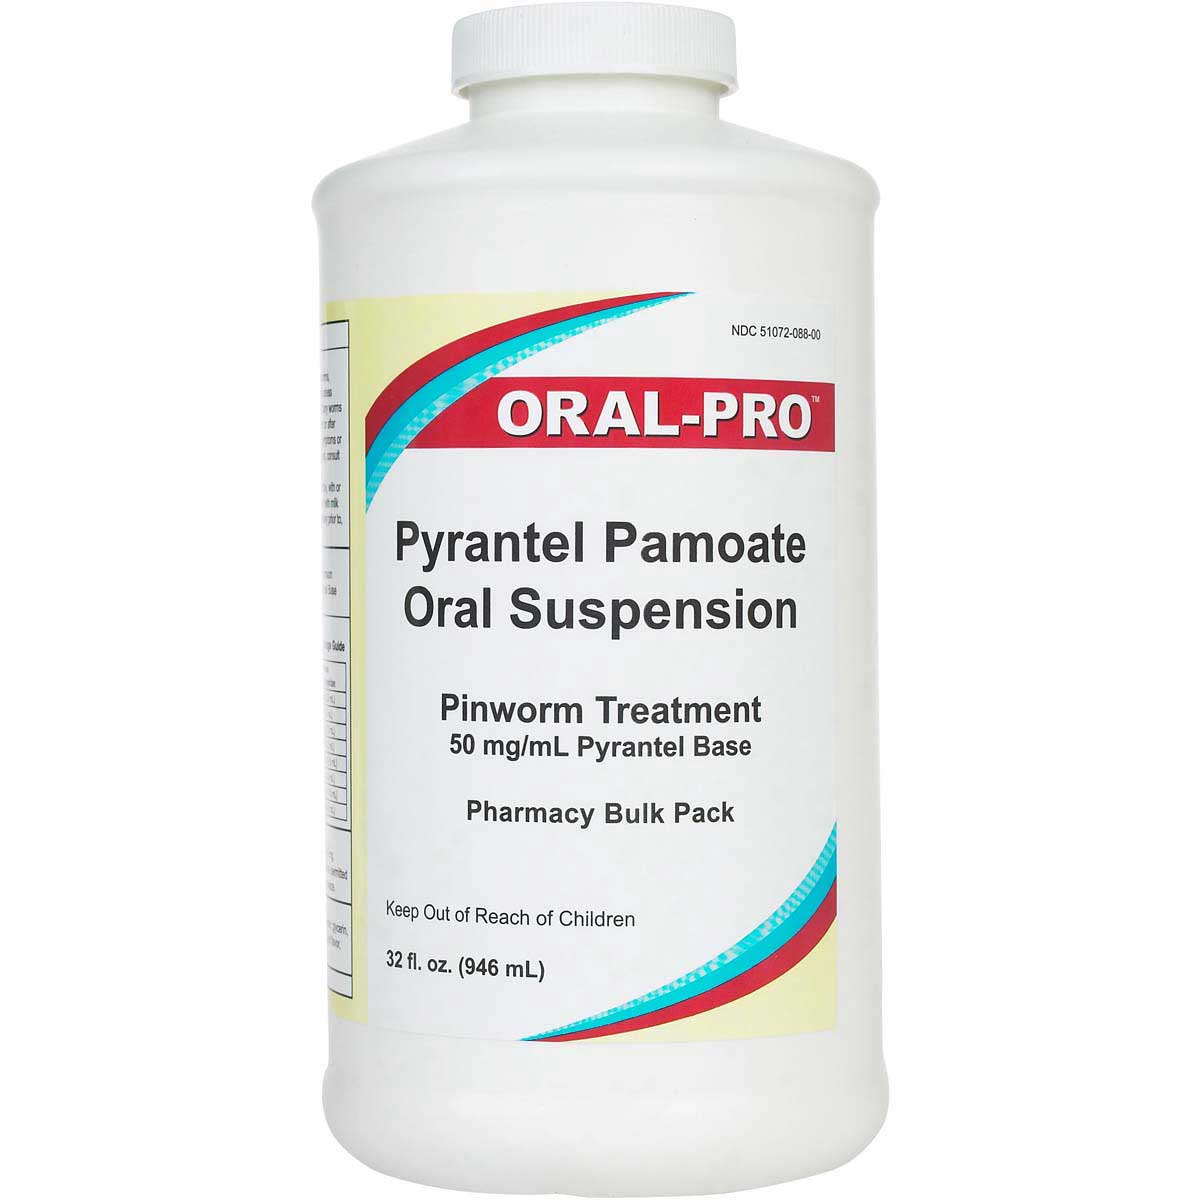 How does pyrantel pamoate work Maple suyrup diet